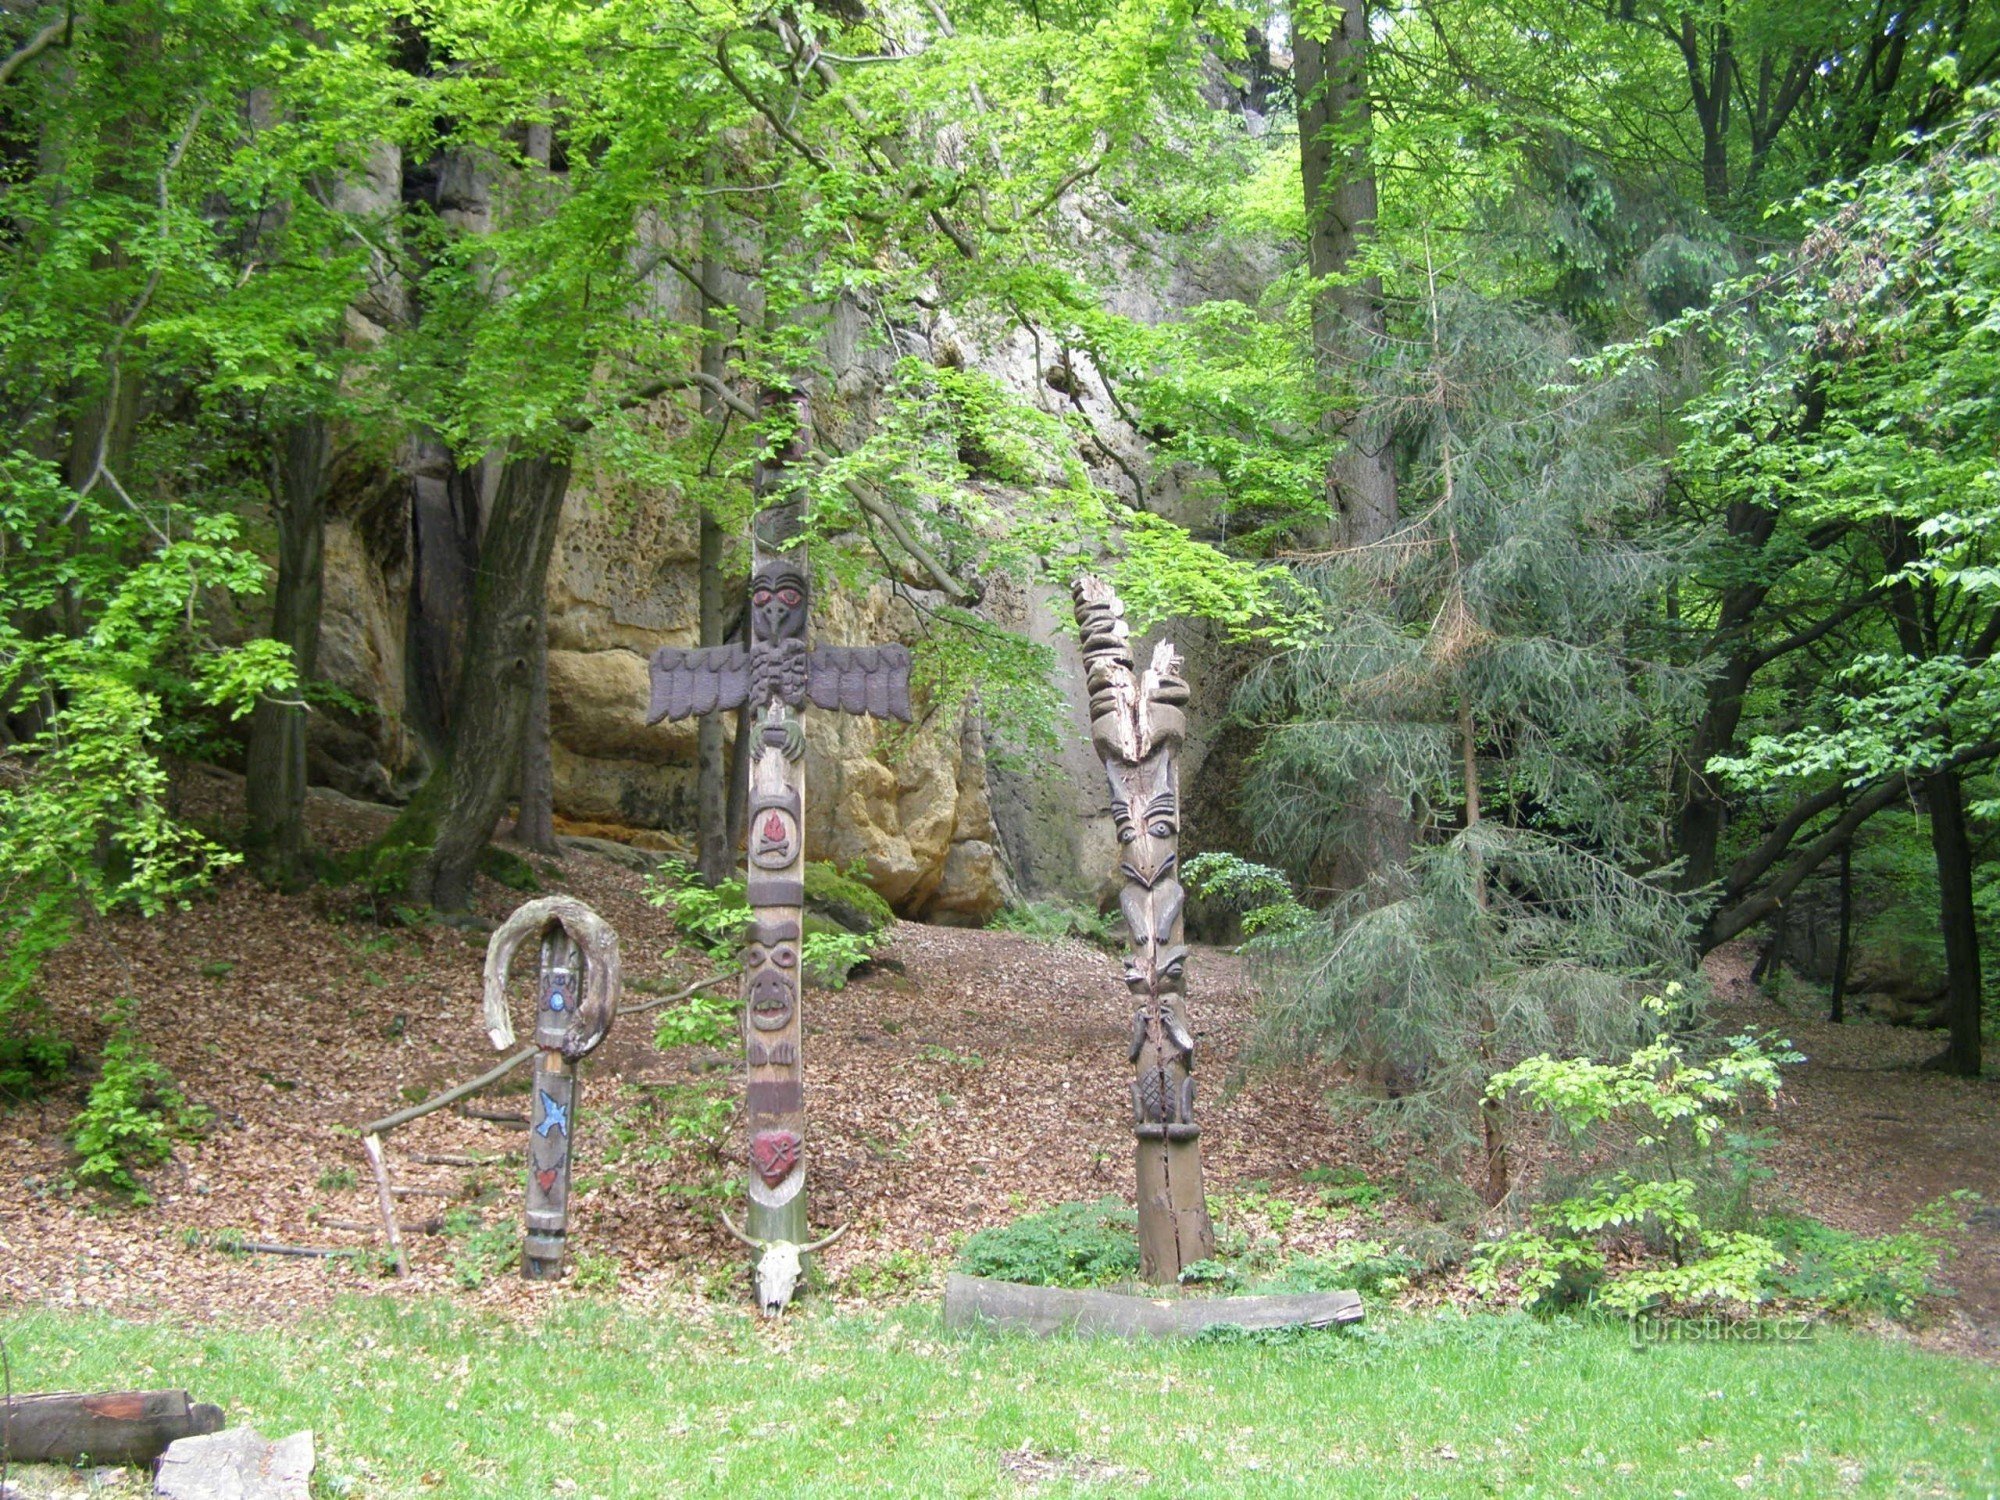 totems in the White Rock settlement